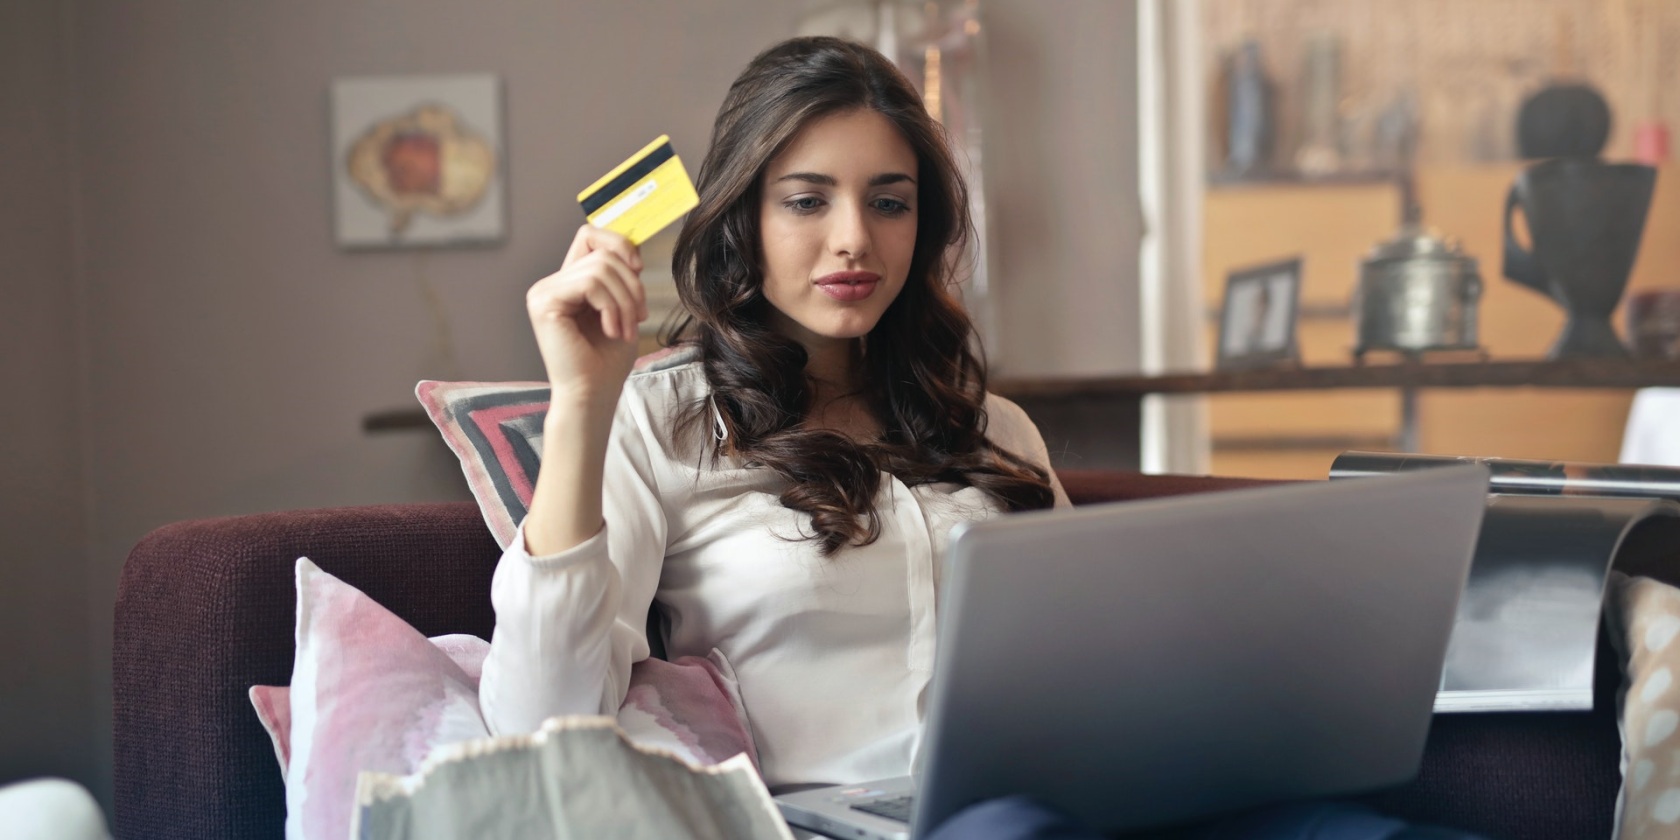 Woman holding a credit card and shopping on her laptop